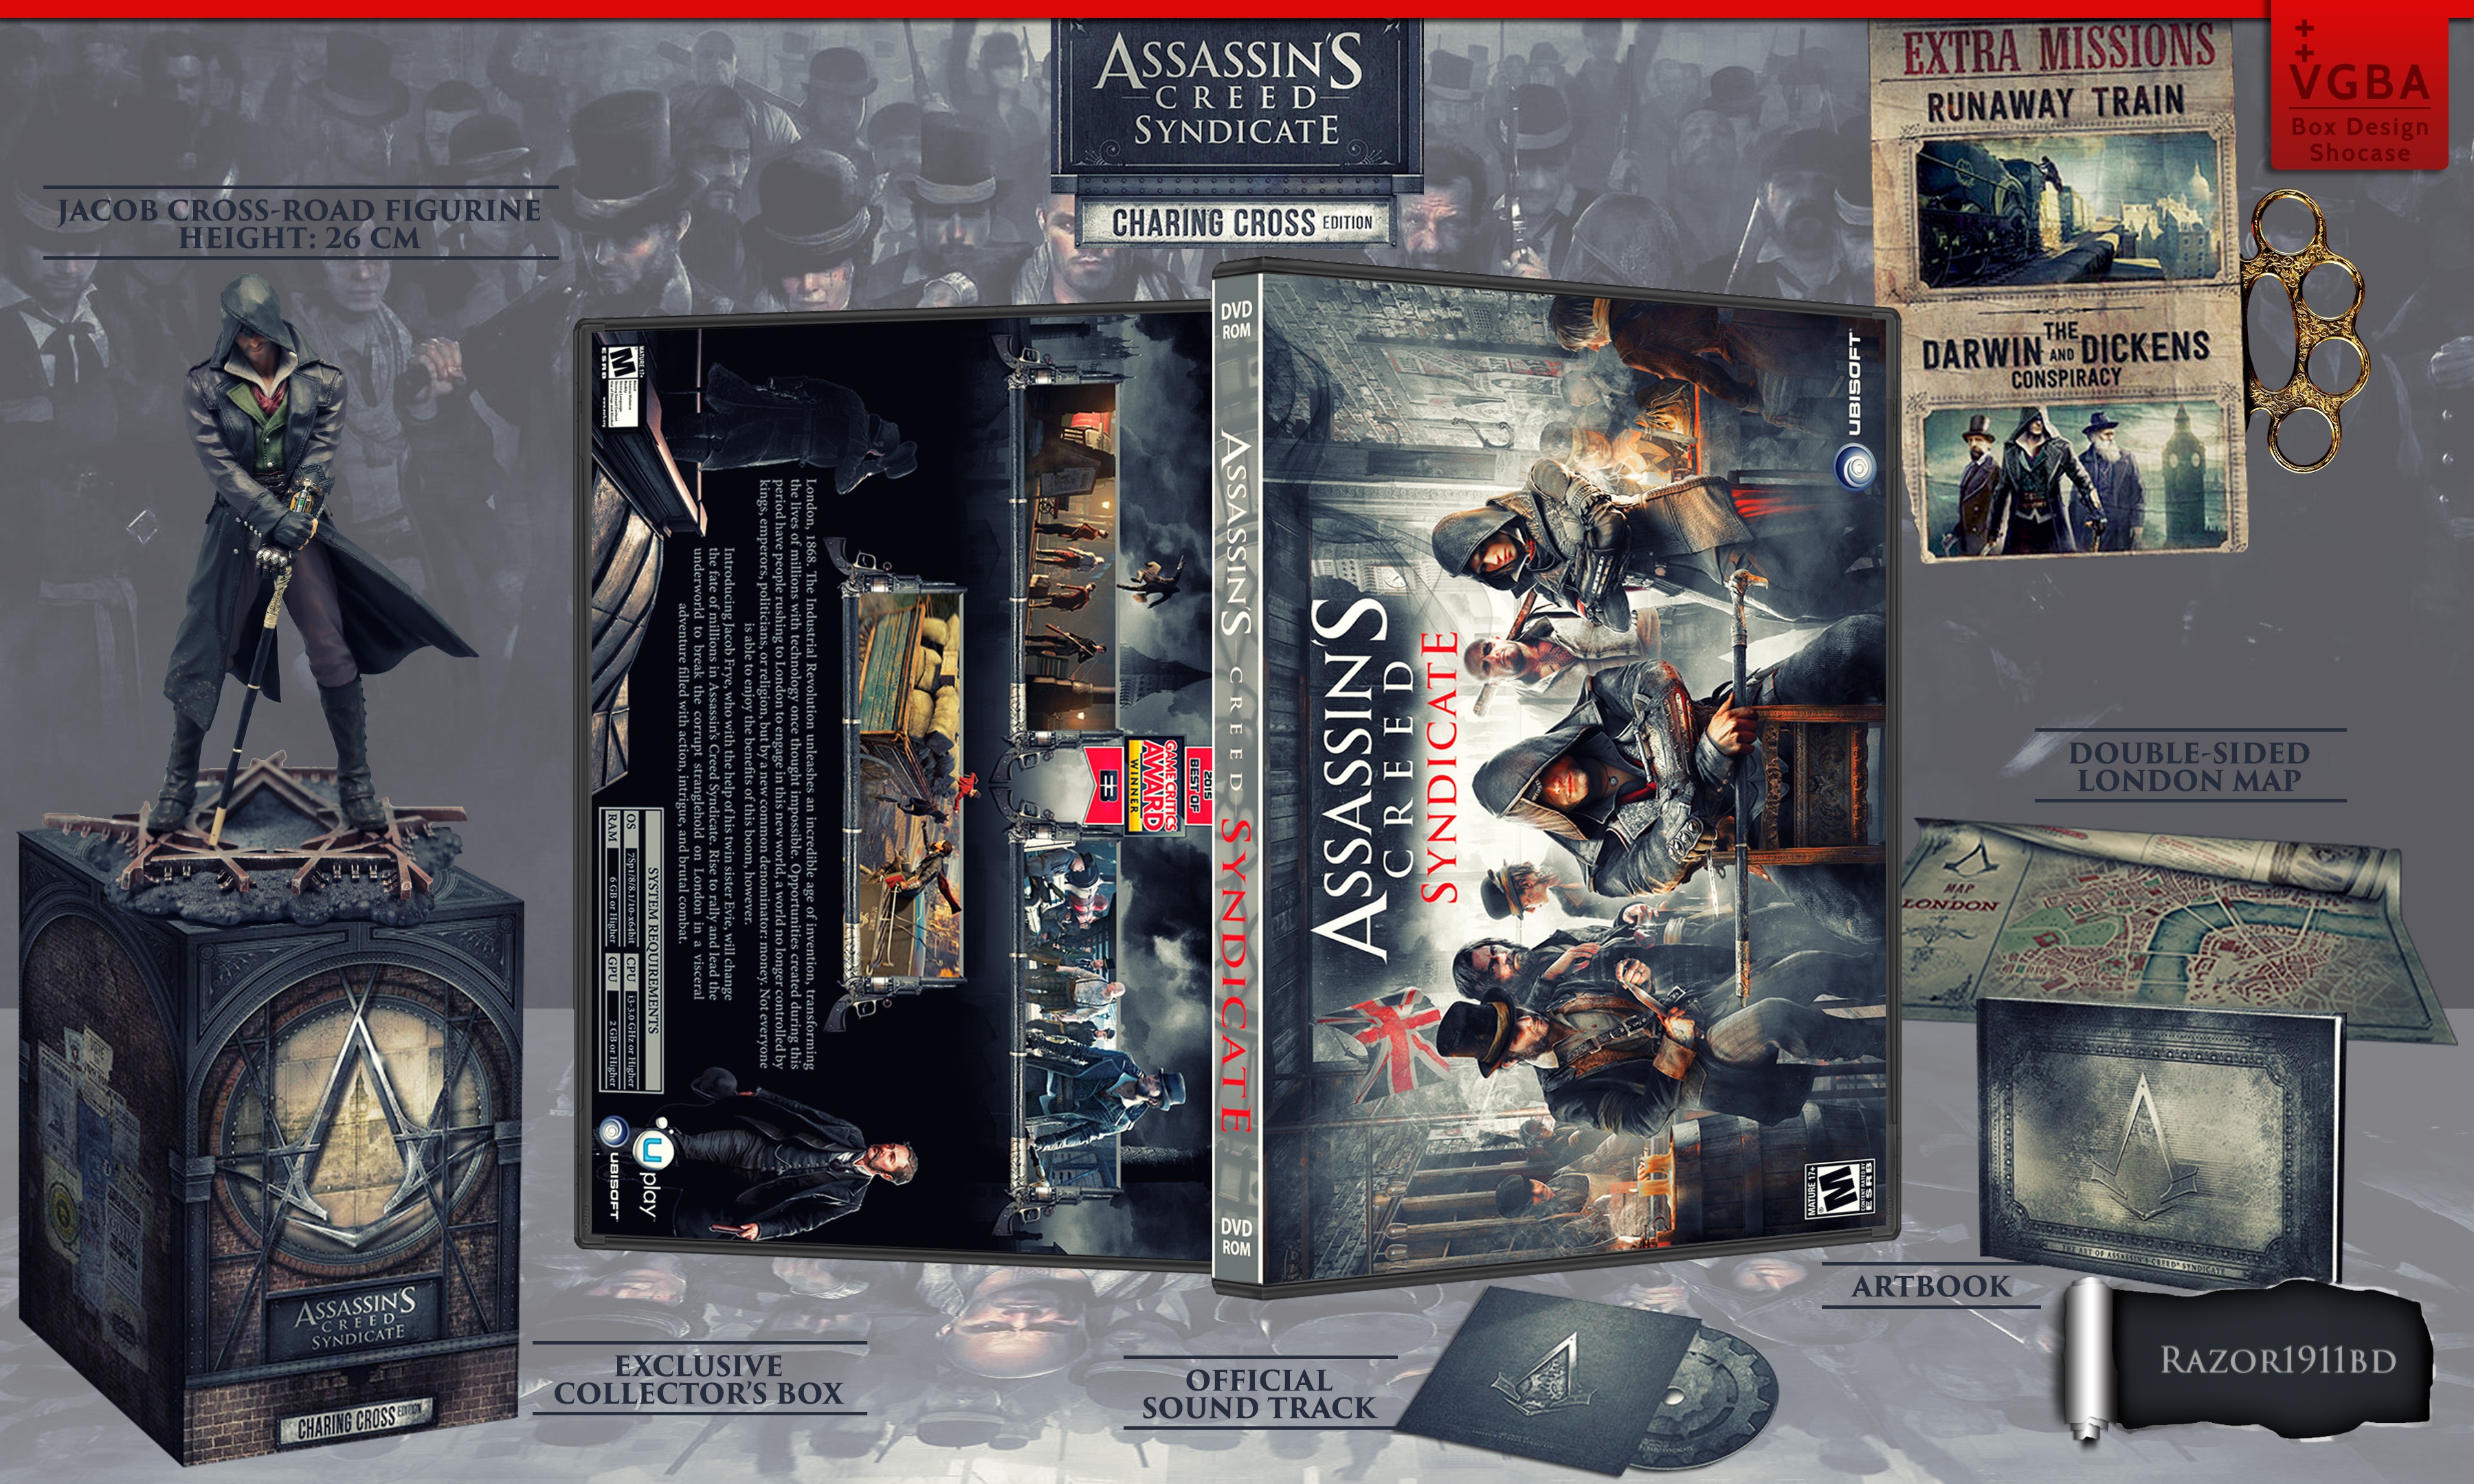 Assassin's Creed Syndicate Charing Cross box cover